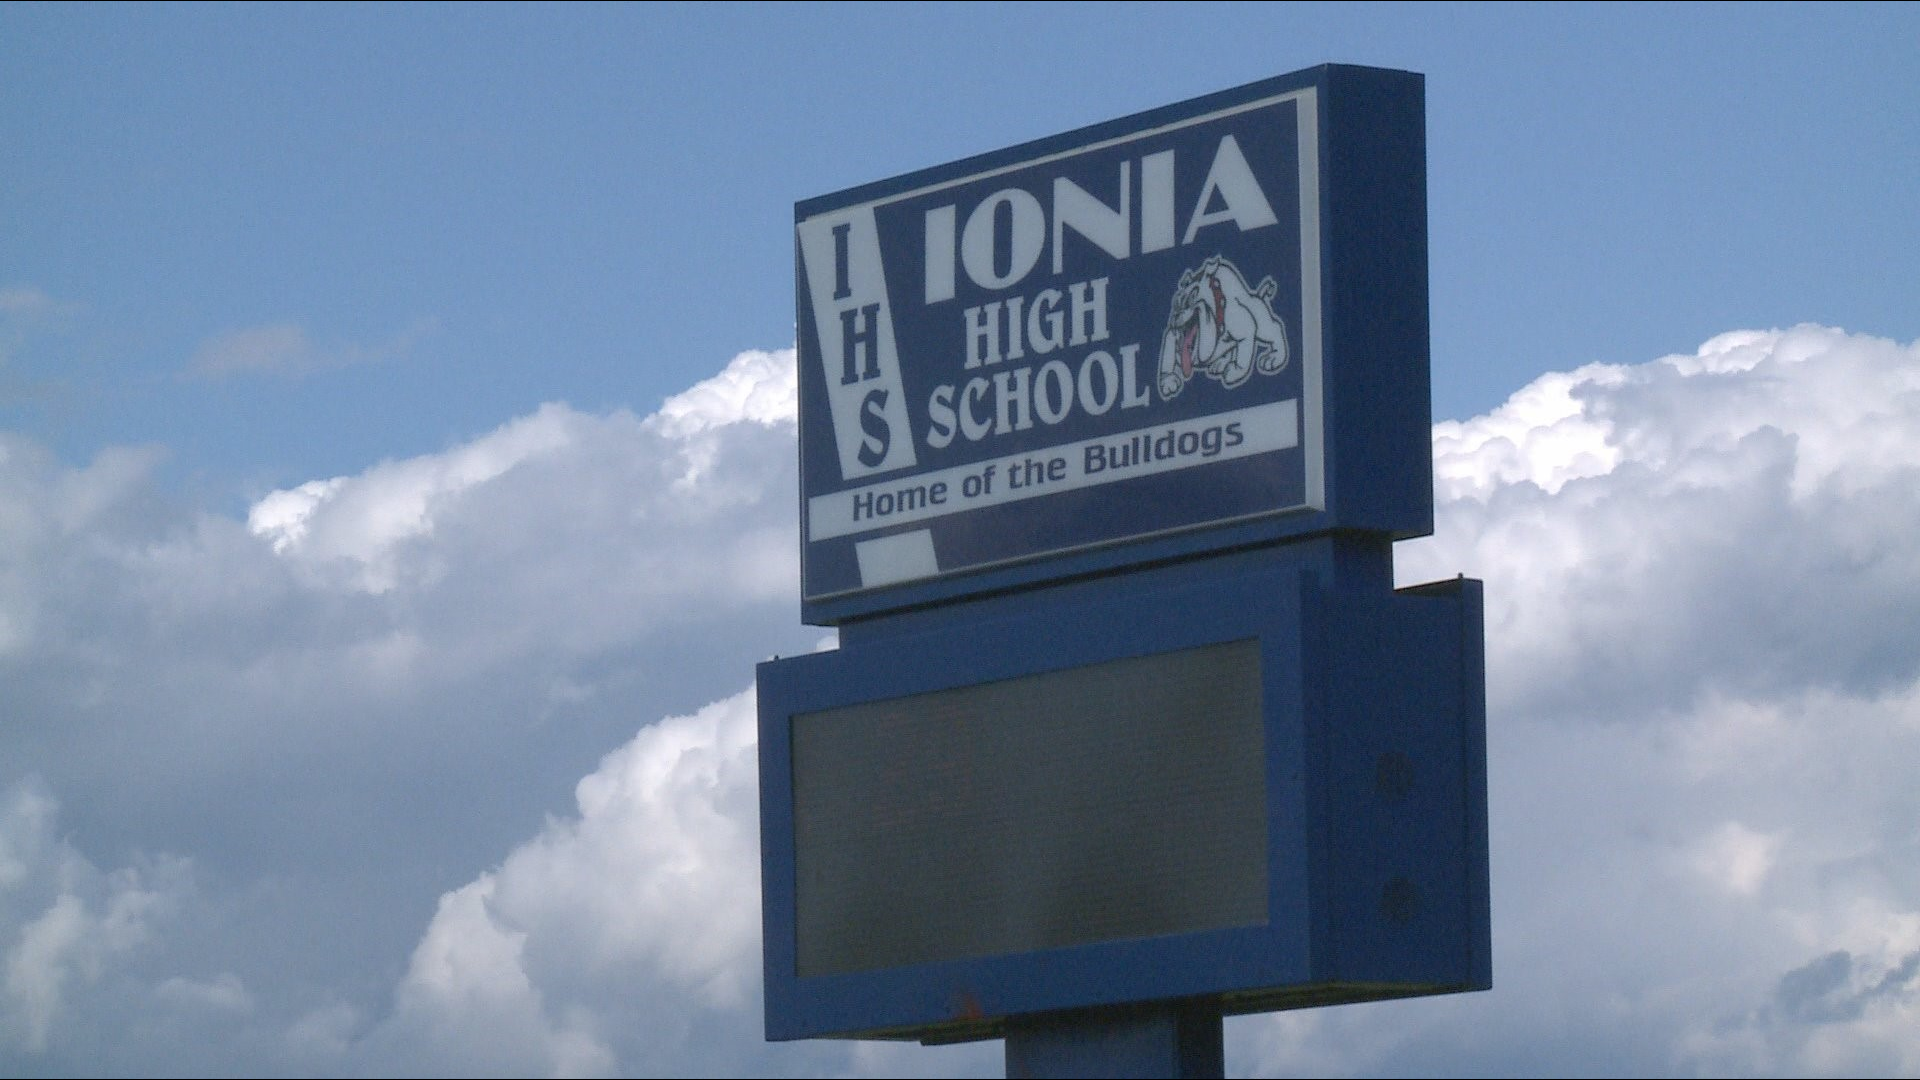 An Ionia High School teacher is on paid administrative leave while authorities investigate reports of misconduct.